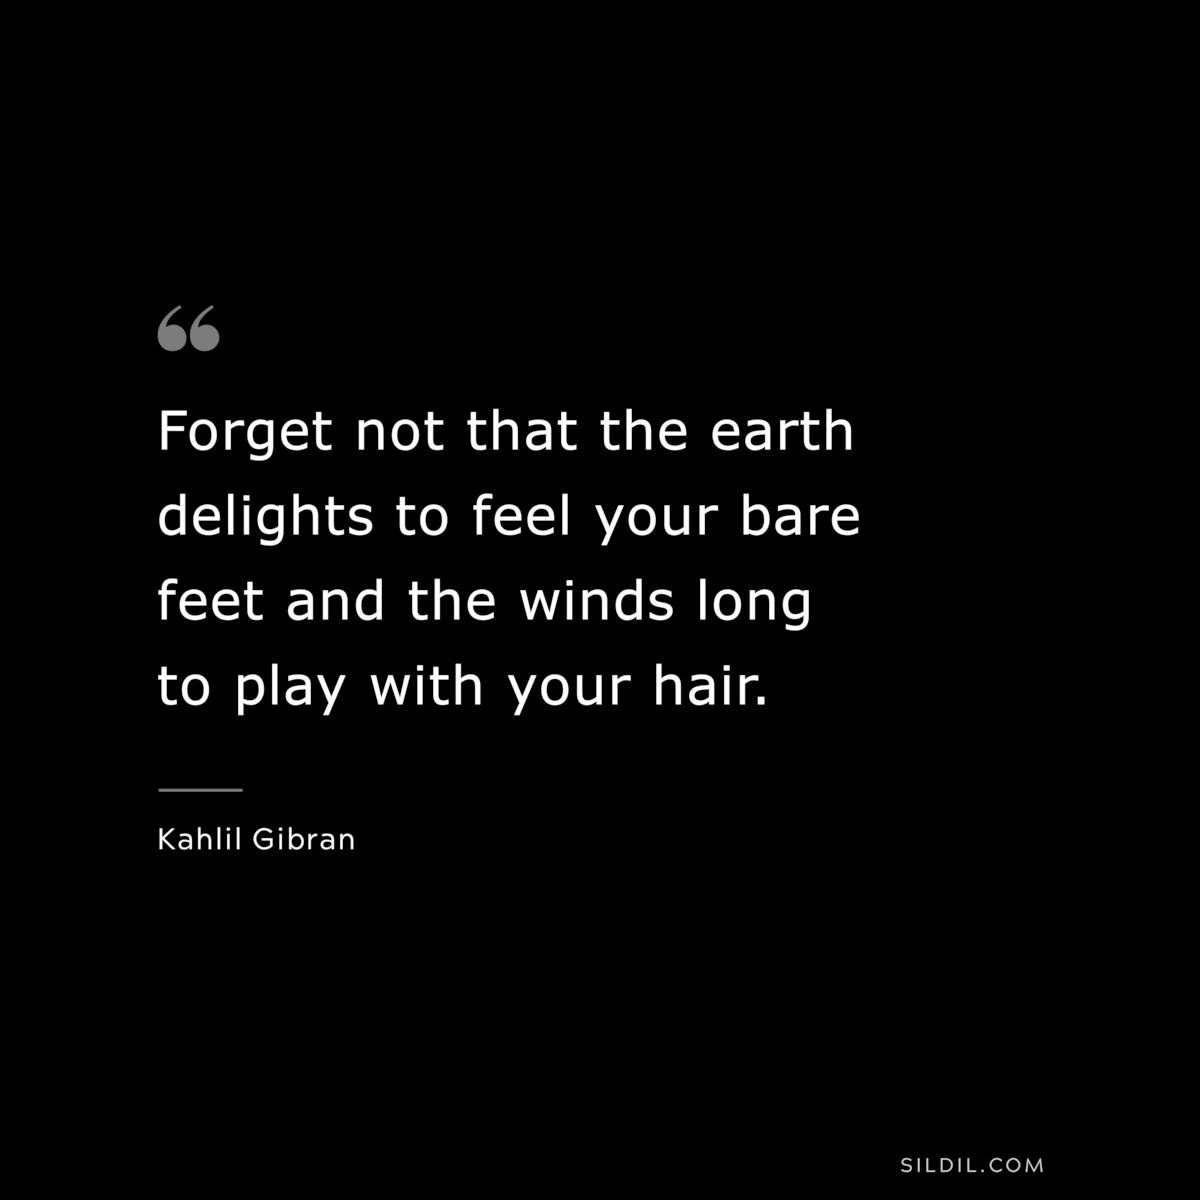 Forget not that the earth delights to feel your bare feet and the winds long to play with your hair. ― Kahlil Gibran